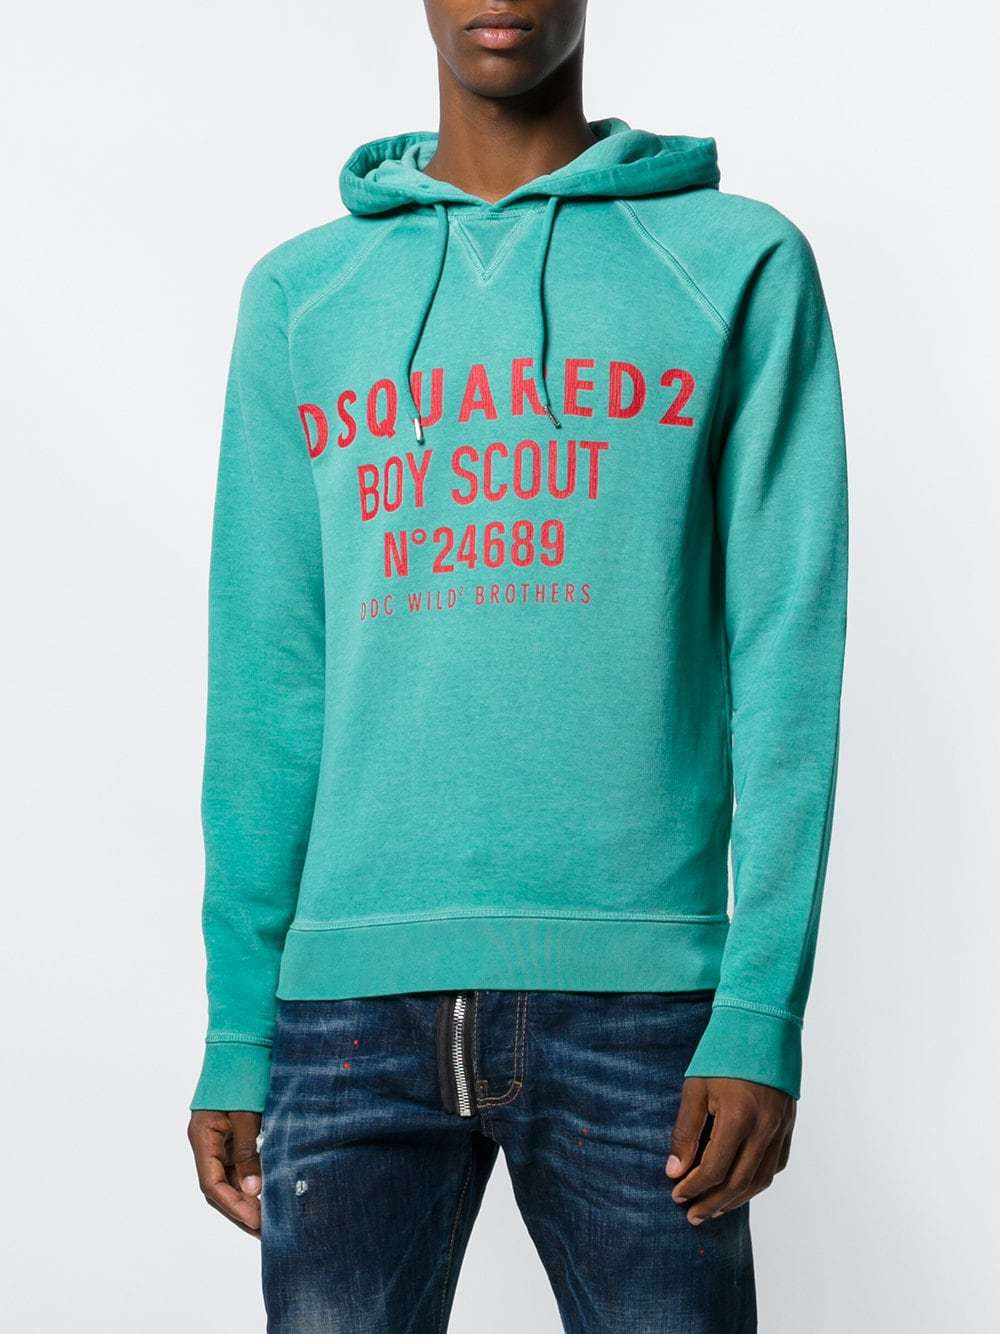 DSQUARED2 Boy Scout Printed Hoodie 